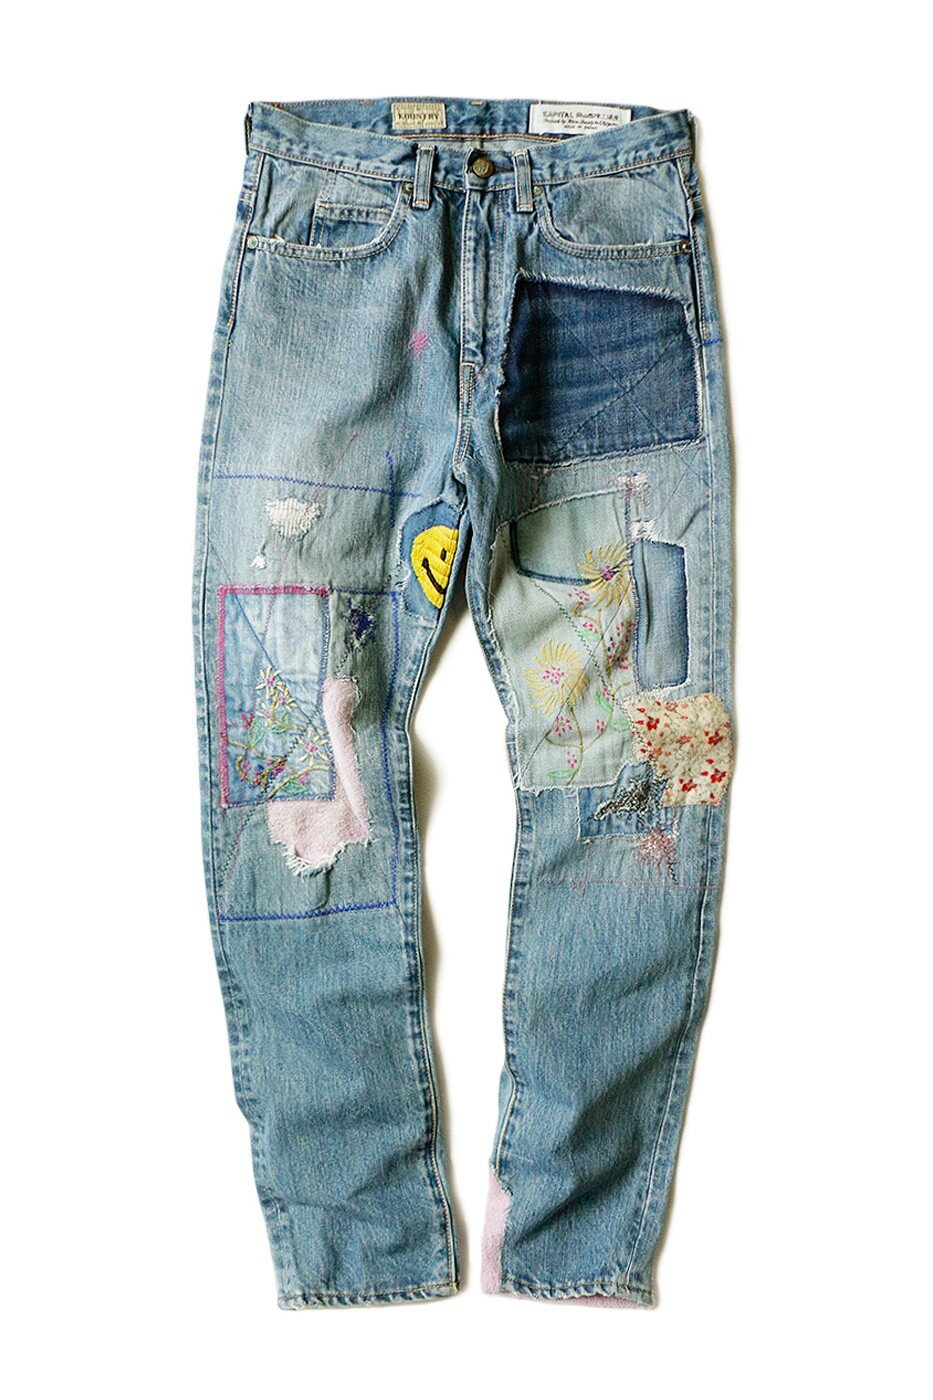 Re-Worked Jeans: Patchwork, Embellished, Embroidered, + Painted Denim ...